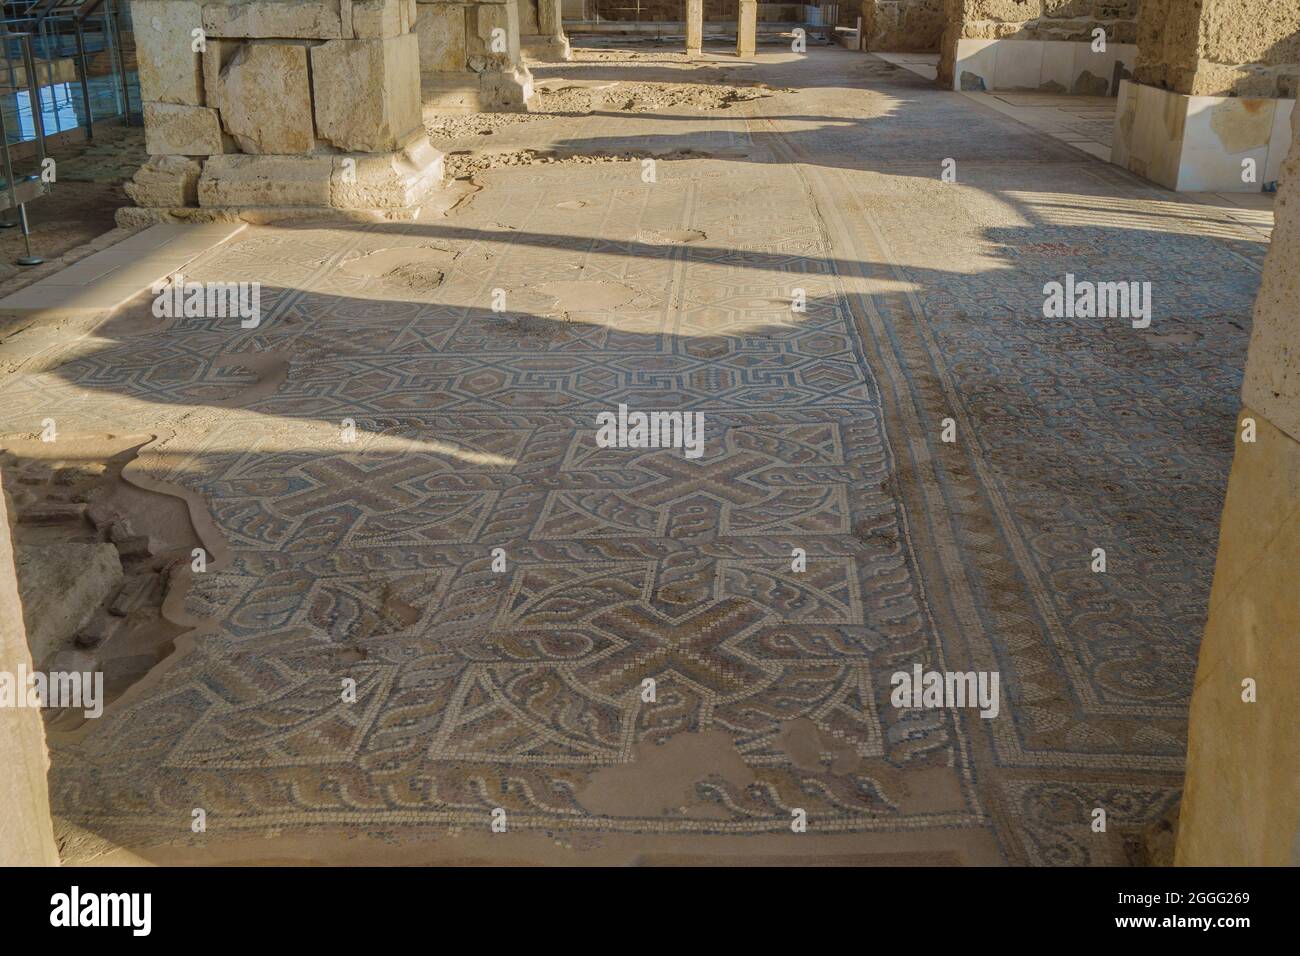 Remains of ancient floor mosaics in ruined church. Ornaments are mixing geometrical elements & early Christian symbols. Authors are unknown. Shot in a Stock Photo